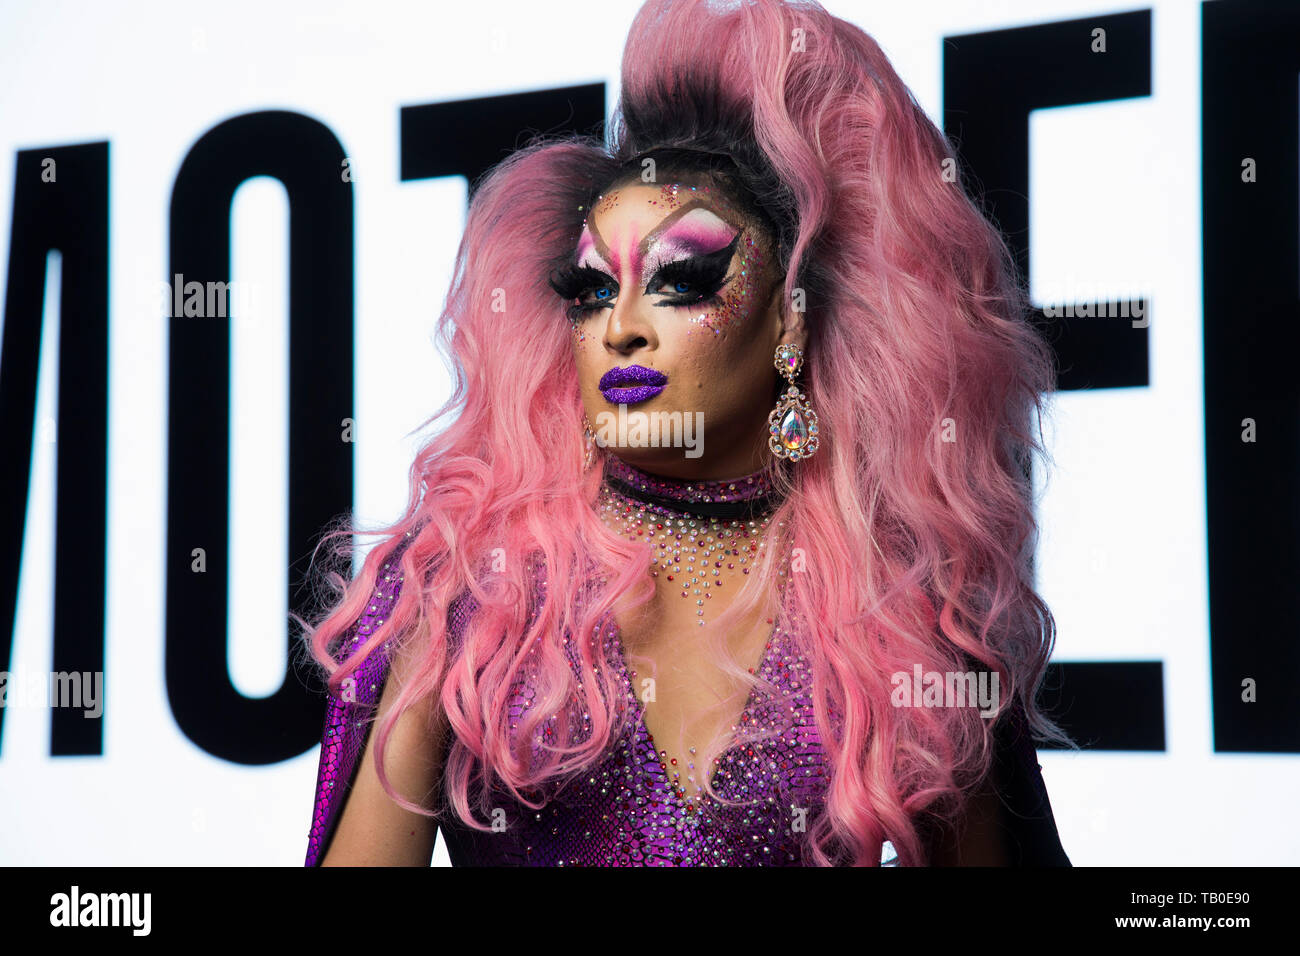 Rupauls Dragcon Los Angeles Convention Center Los Angeles California United States Of 